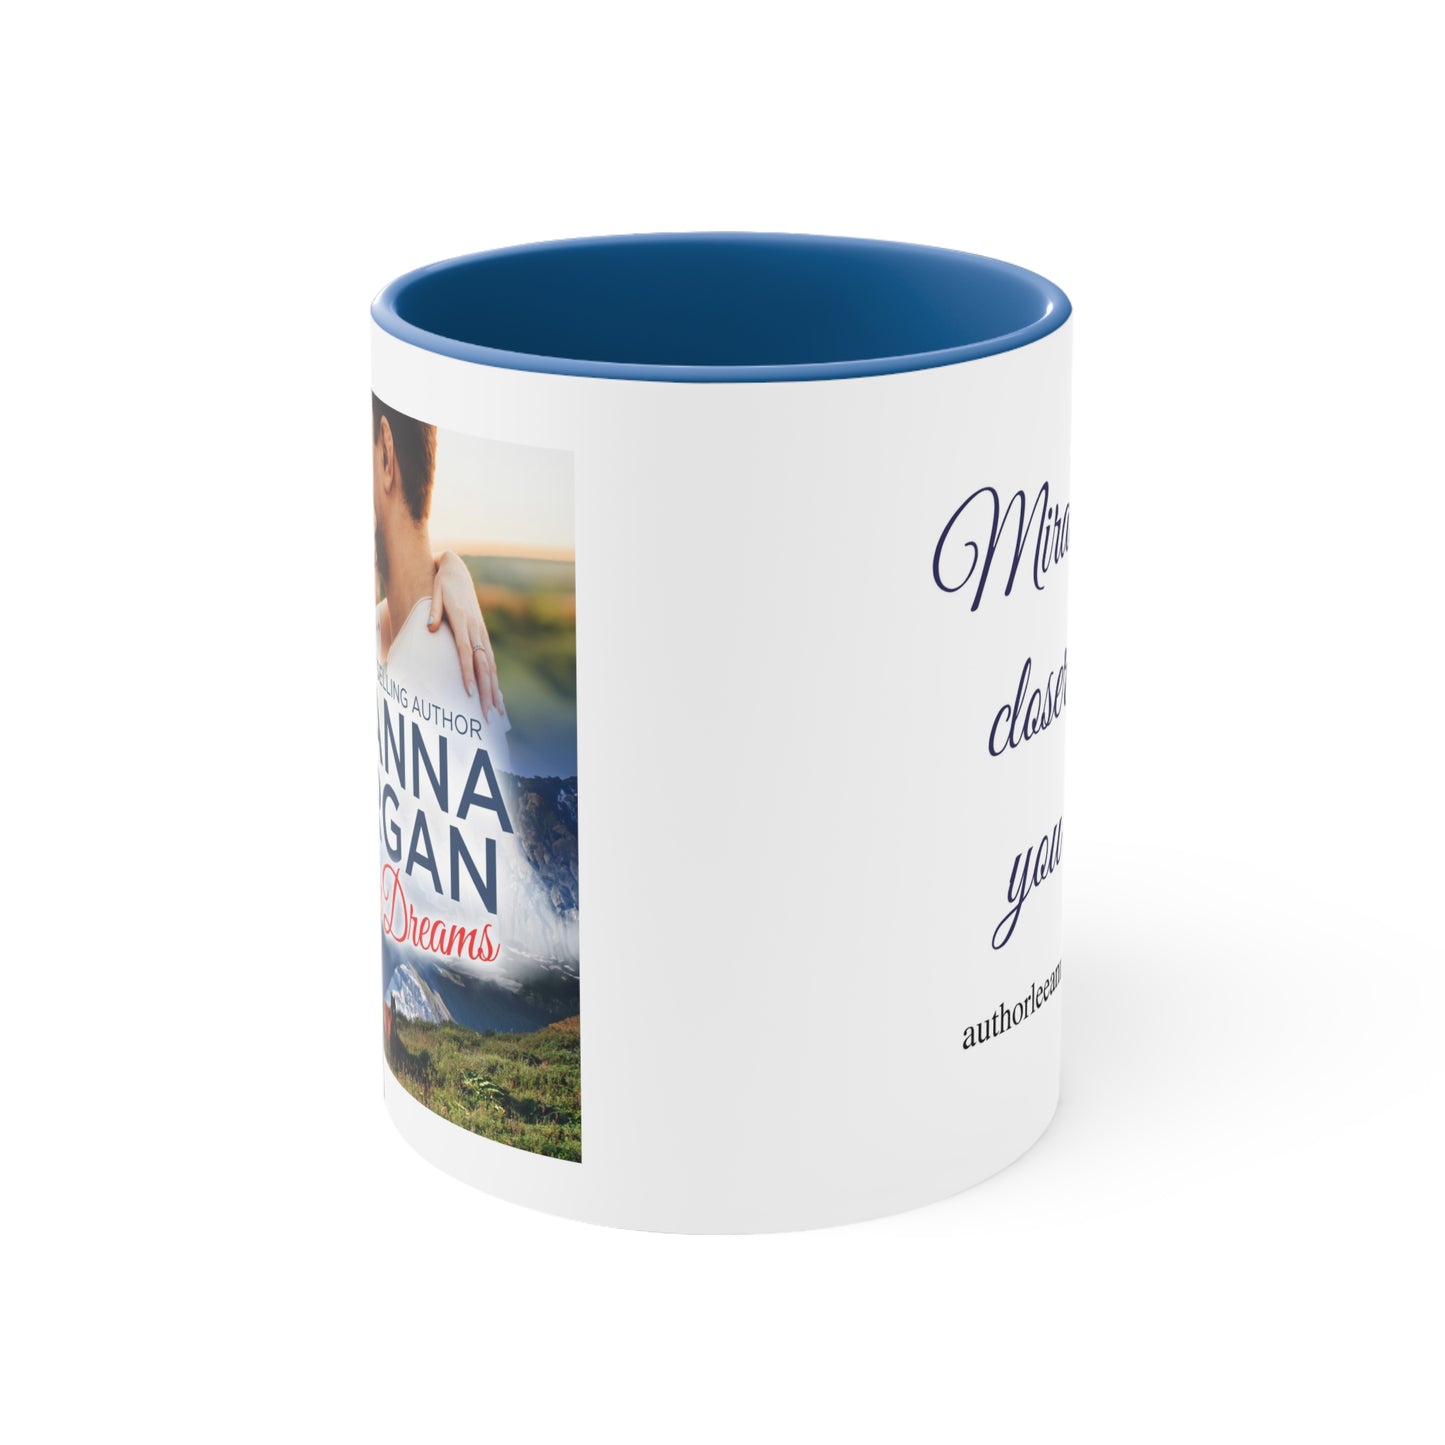 The Forever Dreams Coffee Mug - Miracles are closer than you think